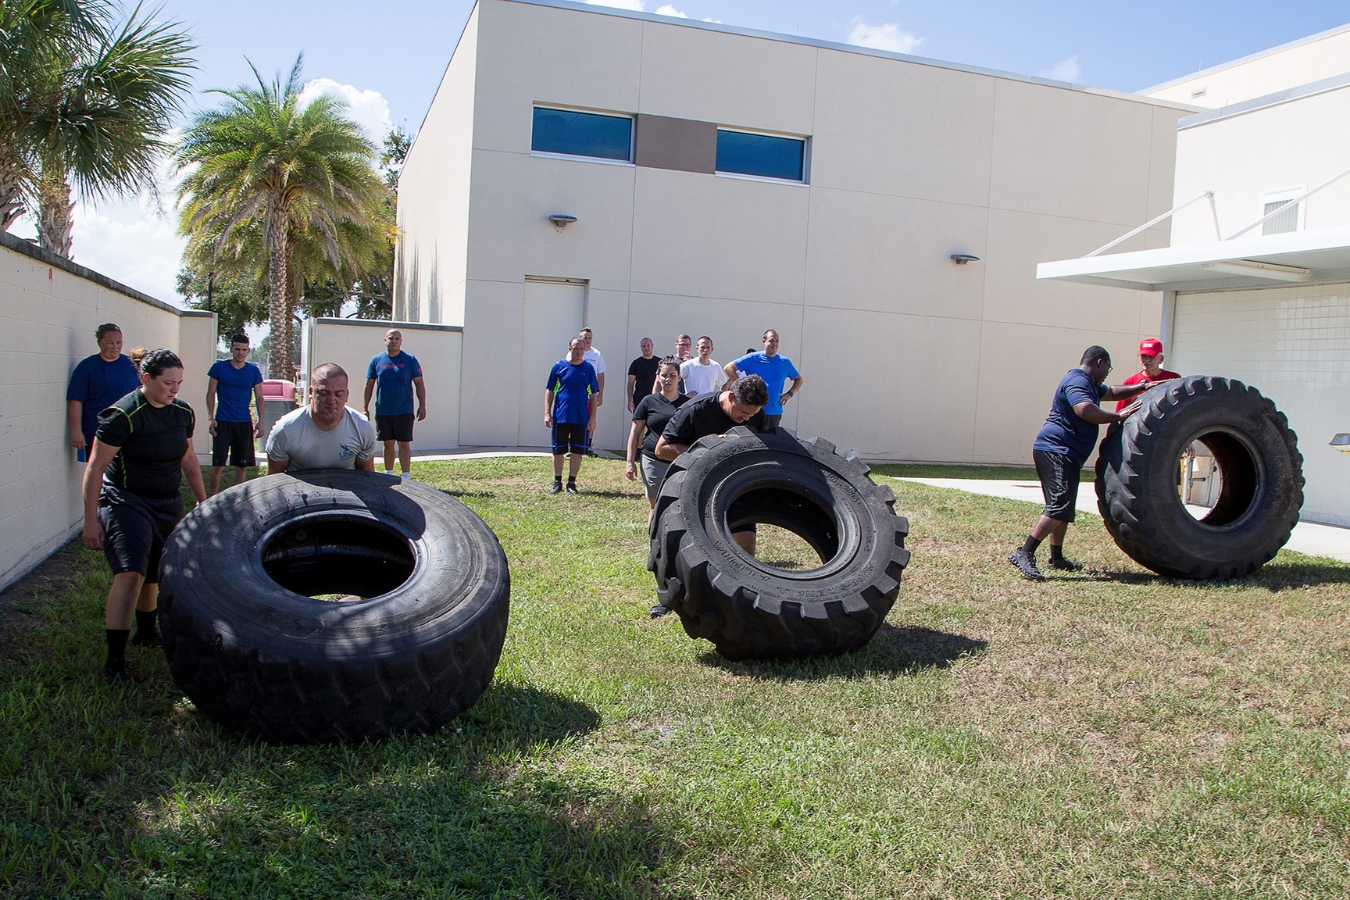 Corrections Officer academy program students engage in outdoor PT at EFSC's Public Safety Institute, tackling an obstacle course with giant tires